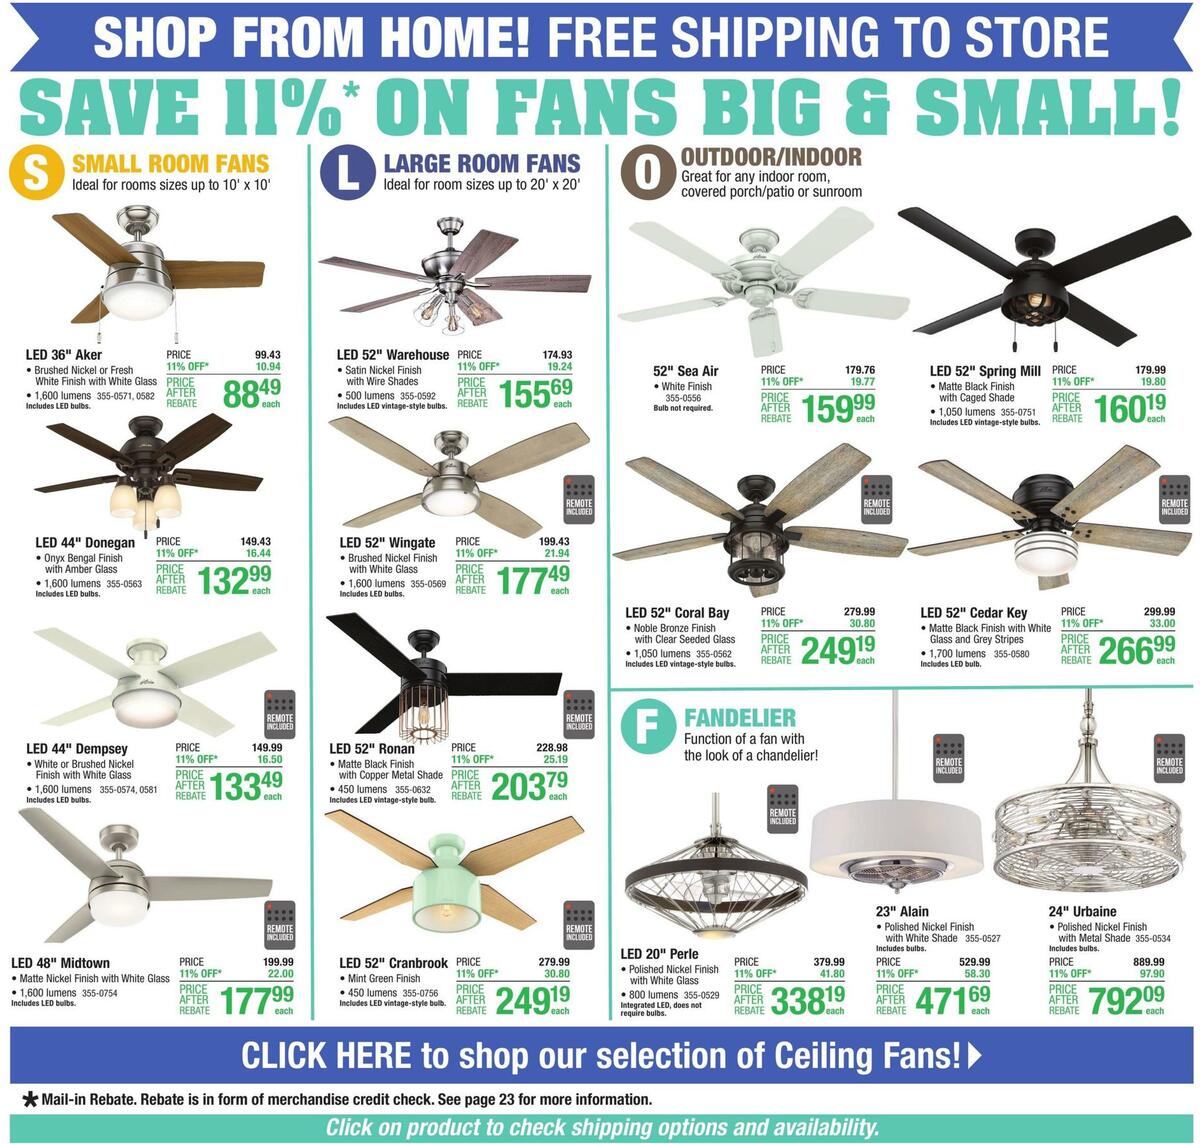 Menards Weekly Ad from July 15